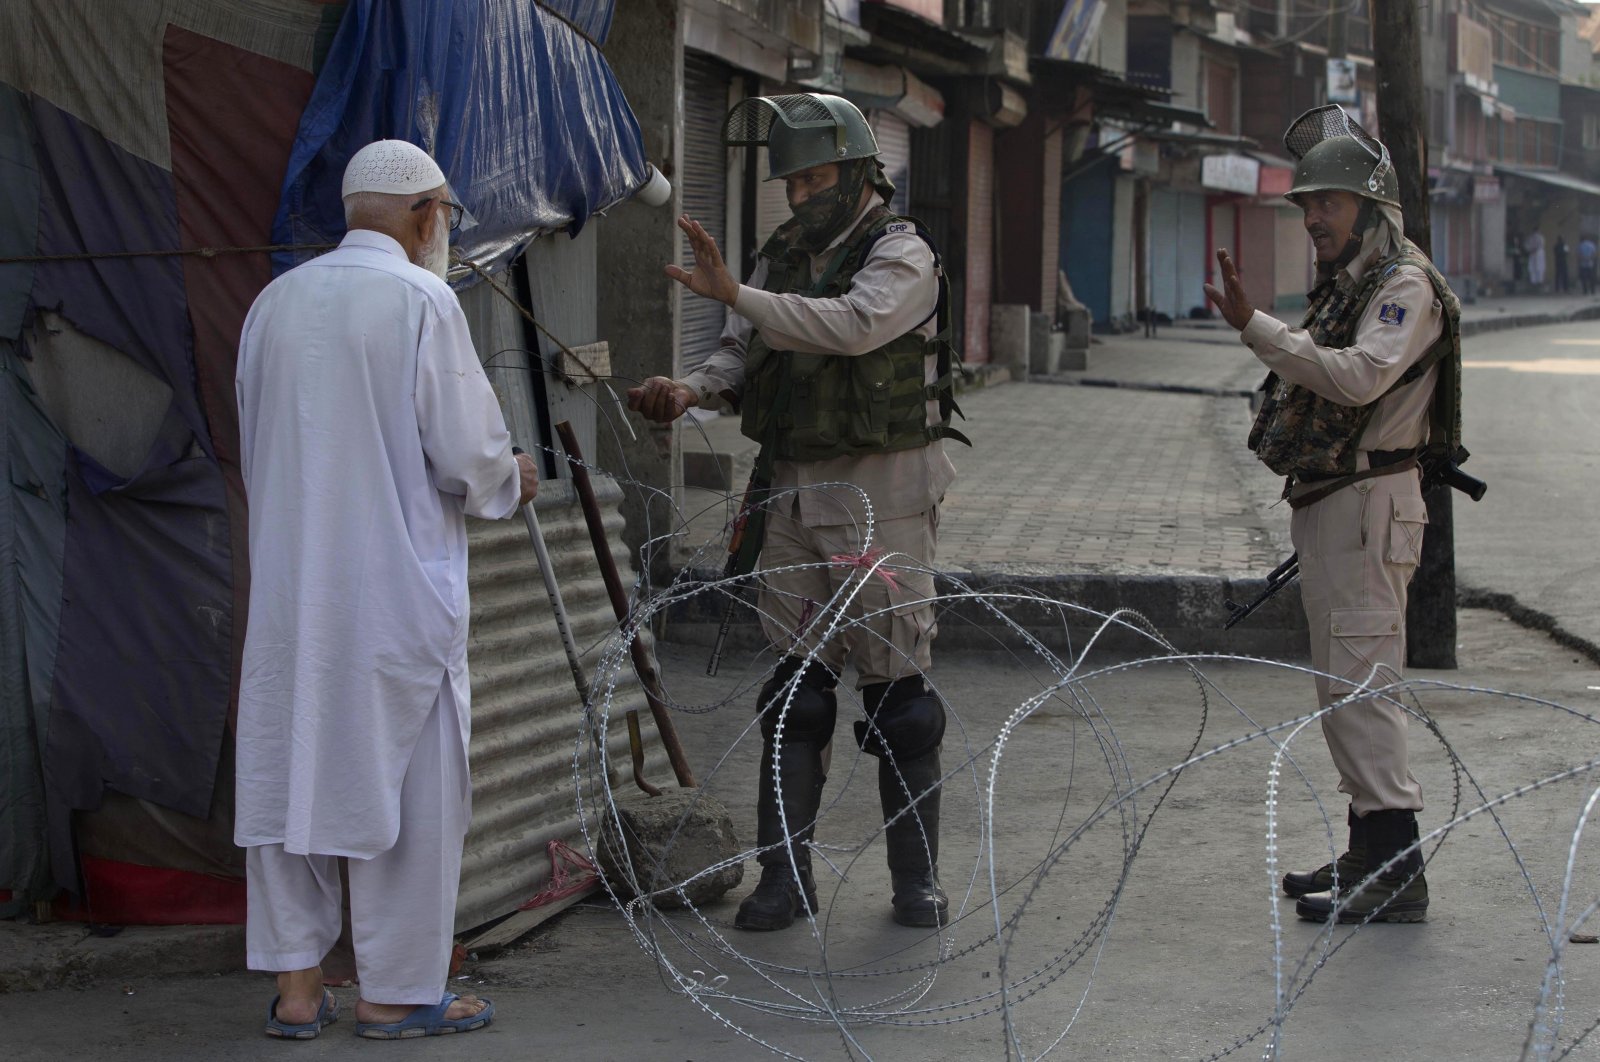 An elderly Kashmiri man is stopped before being allowed to pass near a temporary checkpoint set up by Indian paramilitary soldiers during lockdown in Srinagar, Indian controlled Kashmir, Friday, Aug. 23, 2019. (AP Photo)